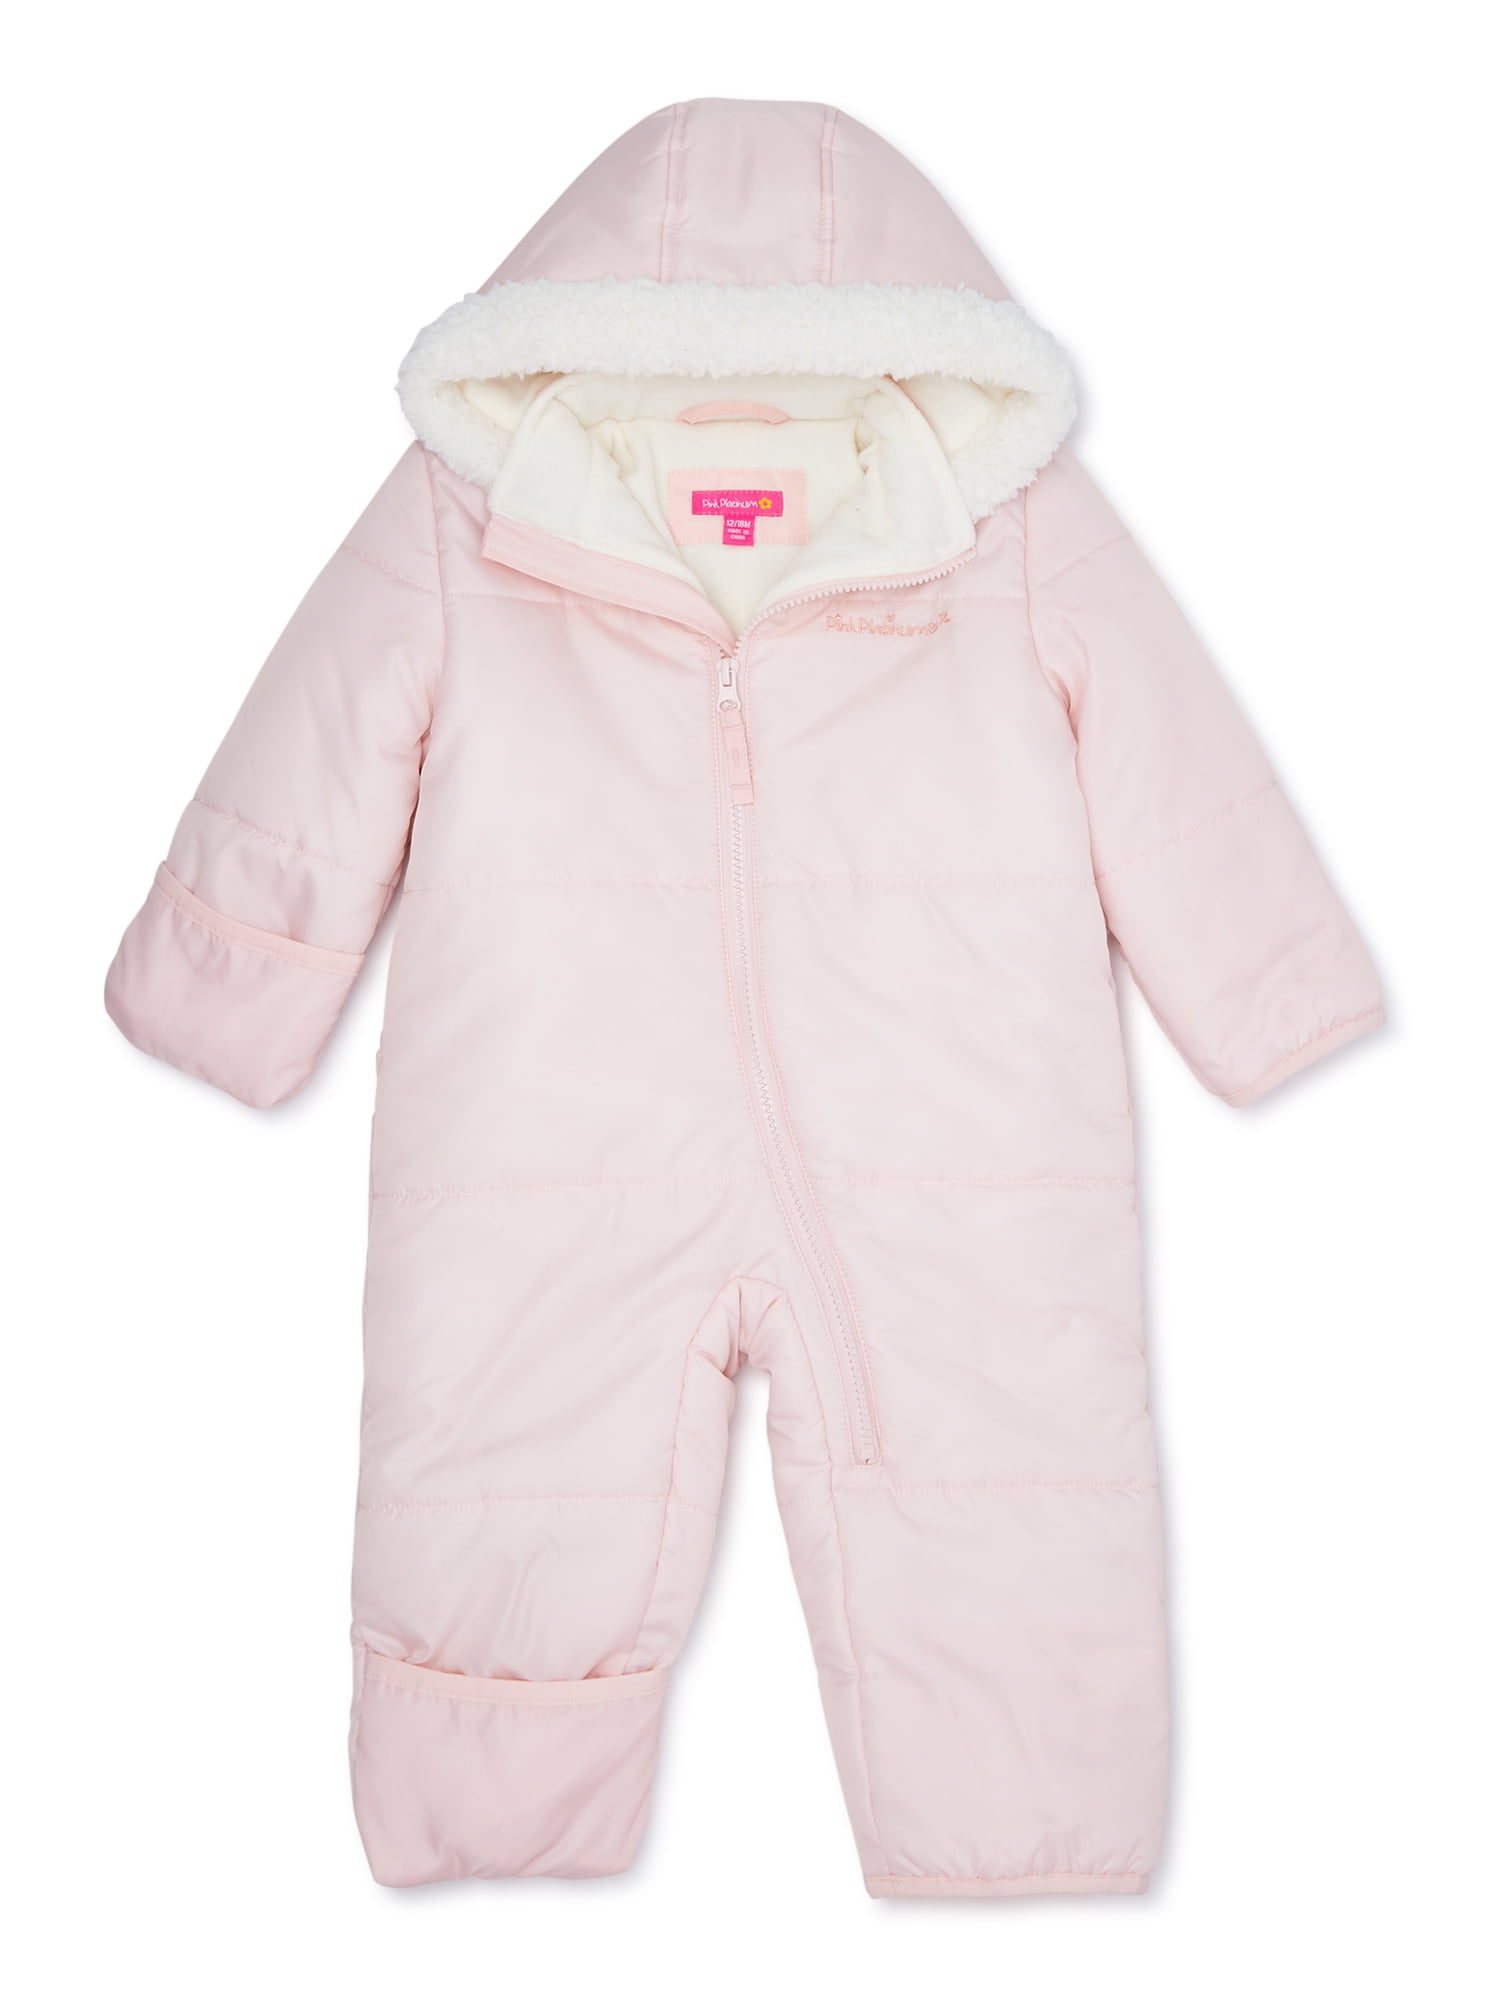 BABY GIRLS PADDED SNOWSUIT ALL IN ONE OUTDOOR COAT MITTS FEET THICK PRAMSUIT NEW 